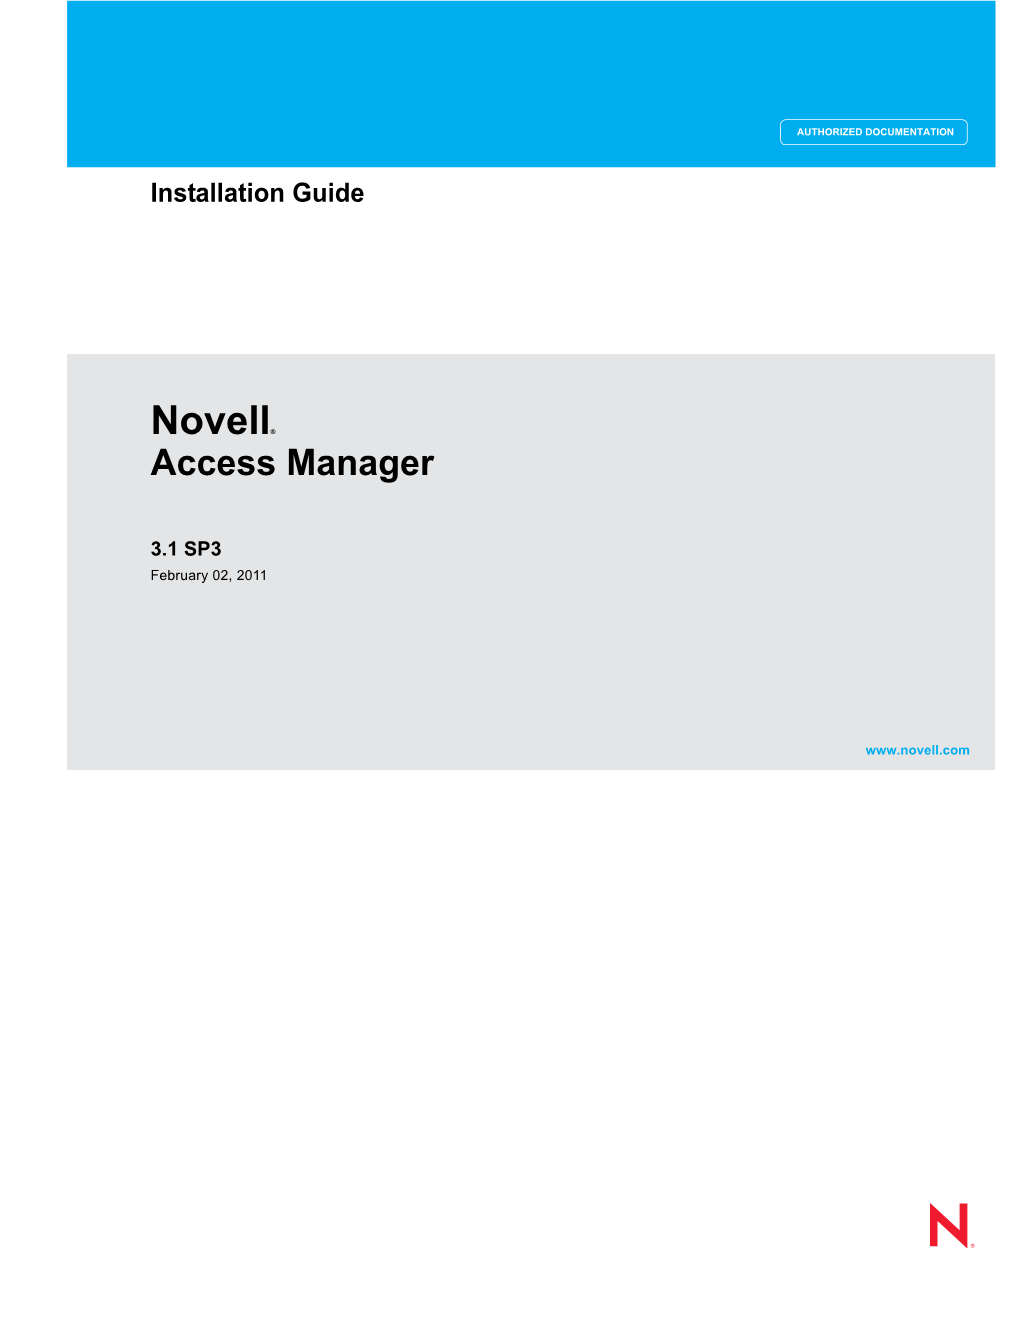 Novell Access Manager 3.1 SP3 Installation Guide Contents